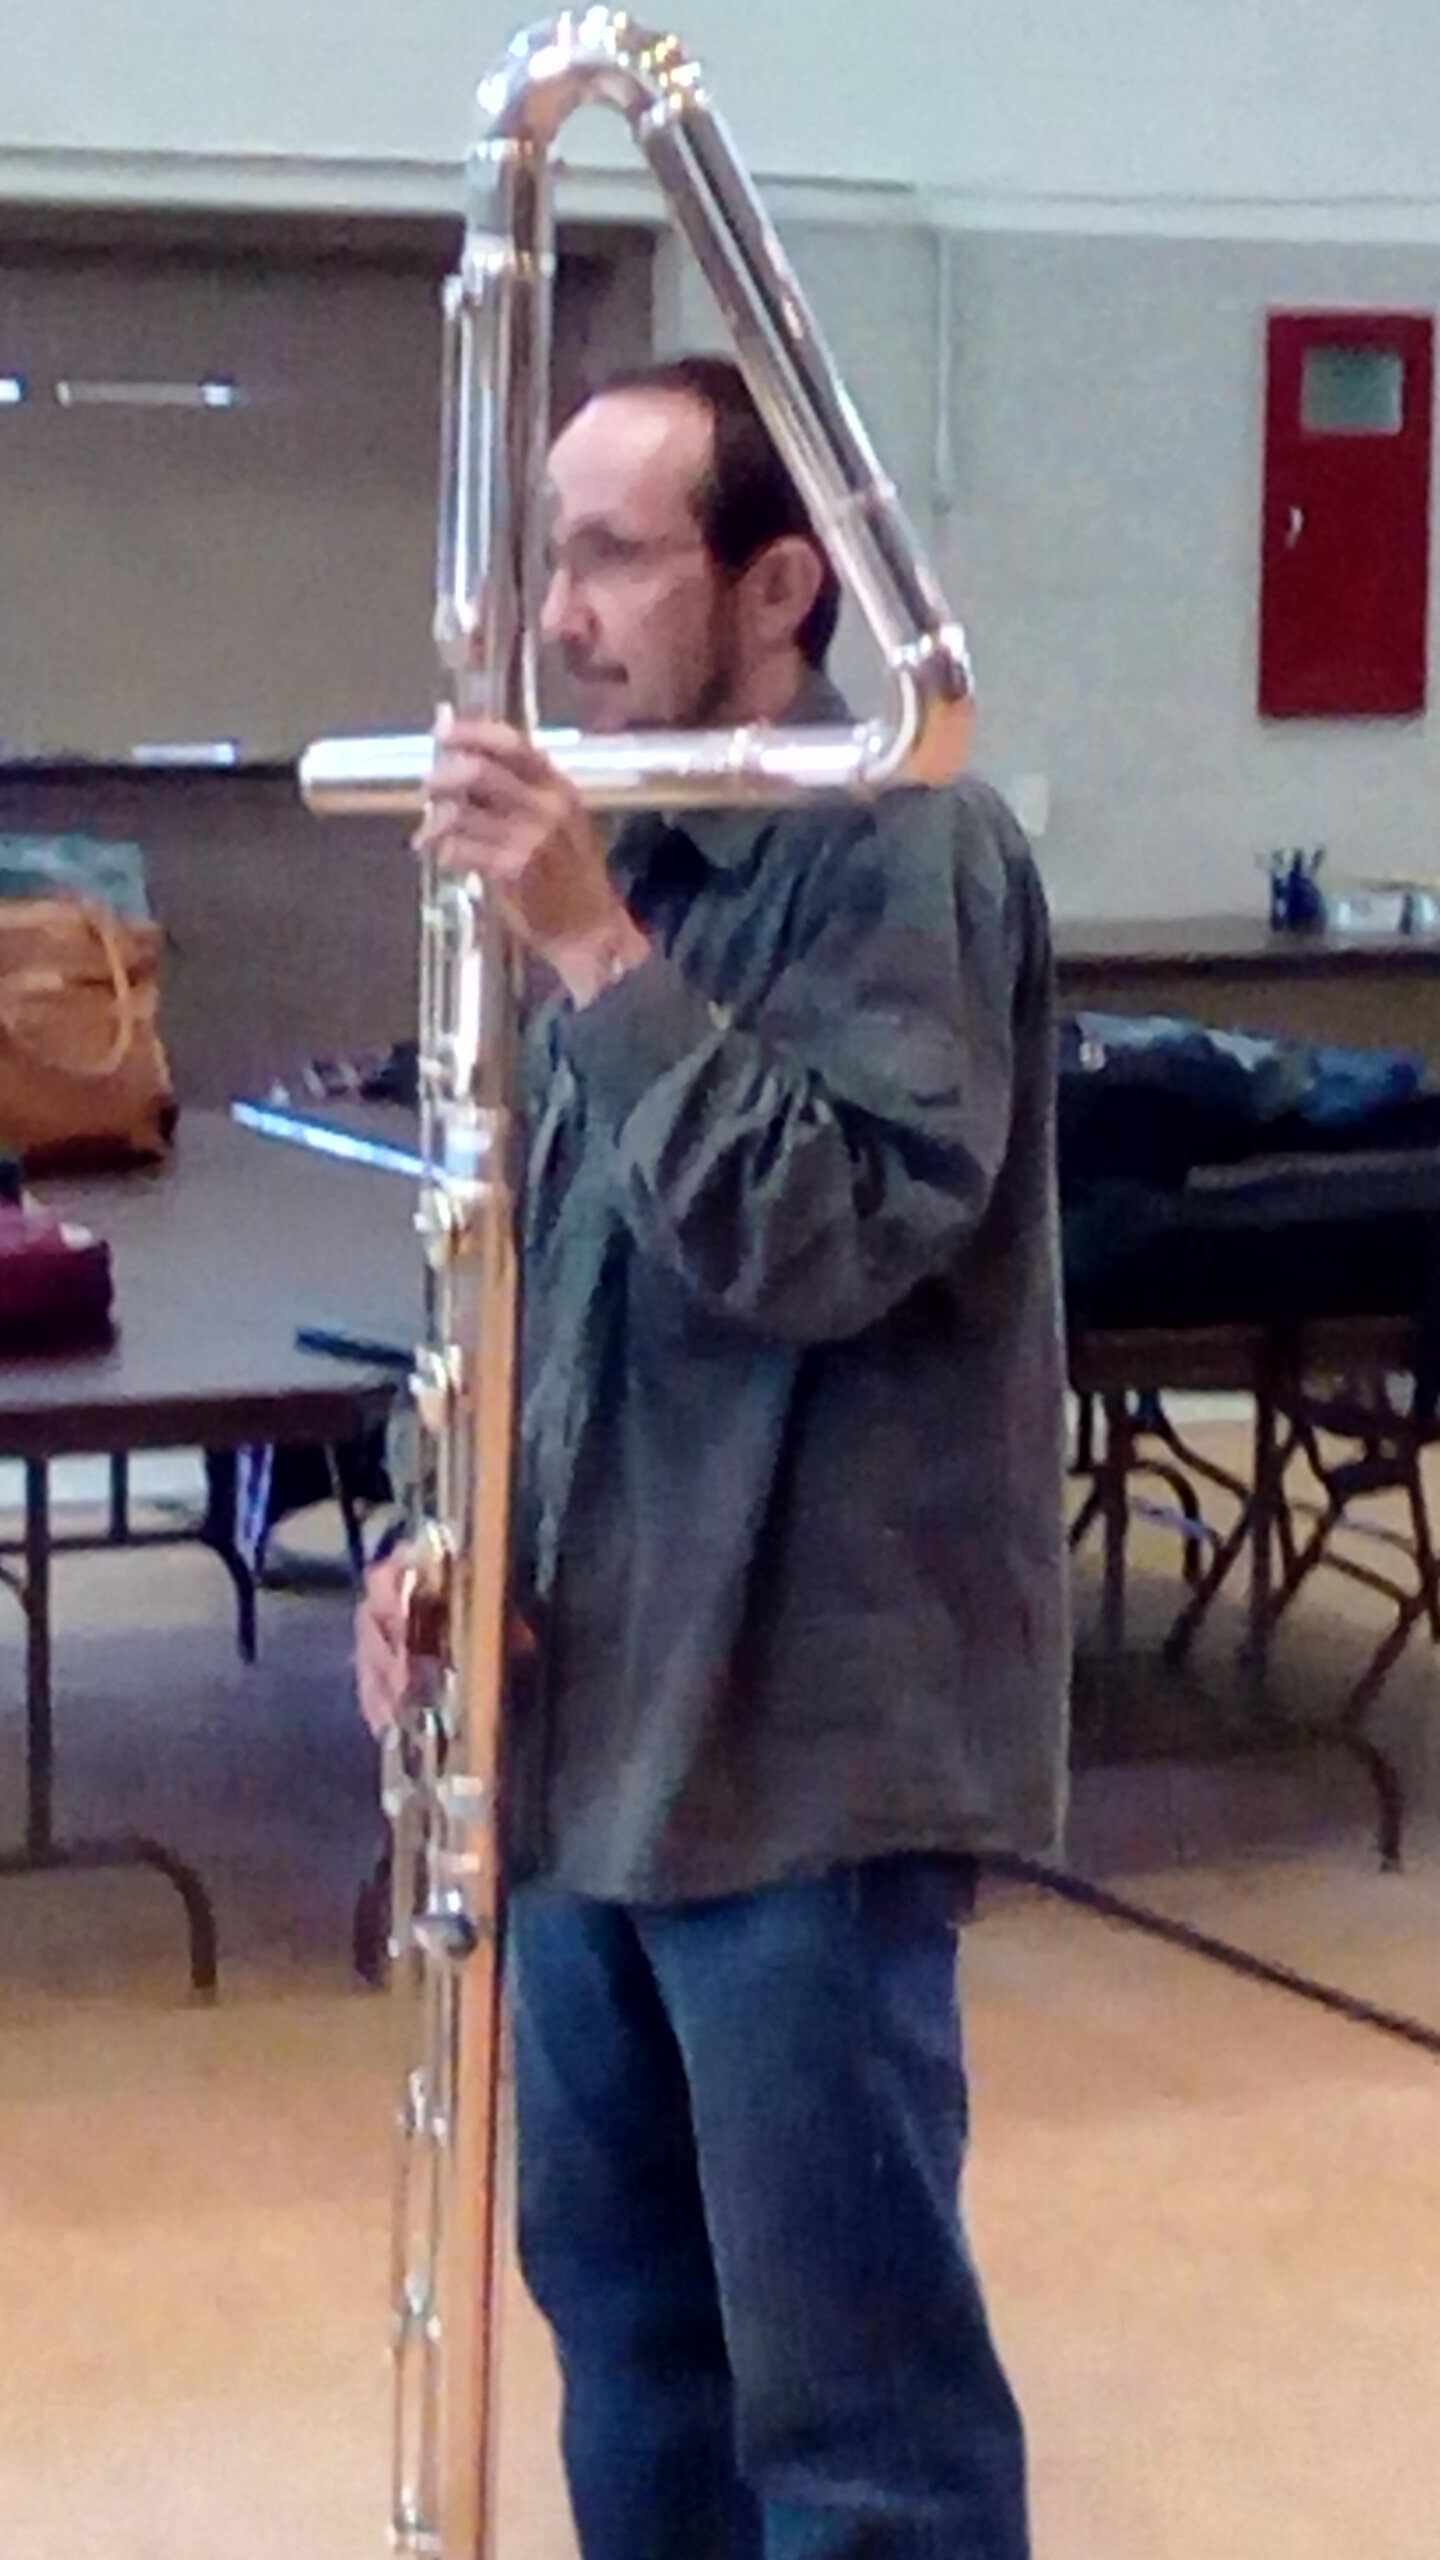 Member playing contrabass flute